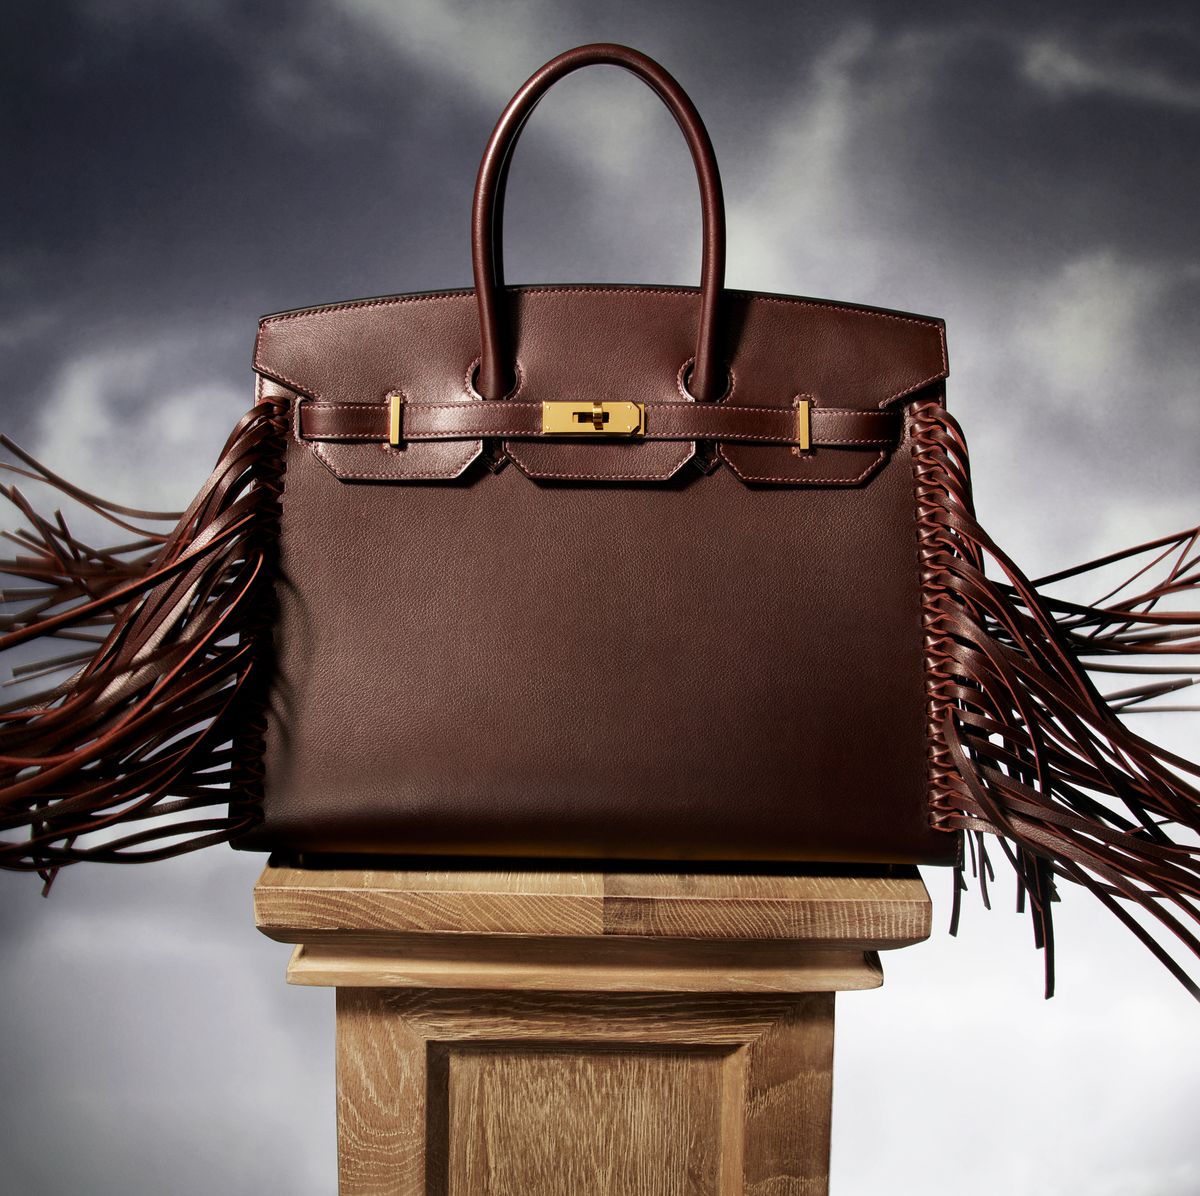 T&C Gift Guide: How to Really Score a Birkin Bag